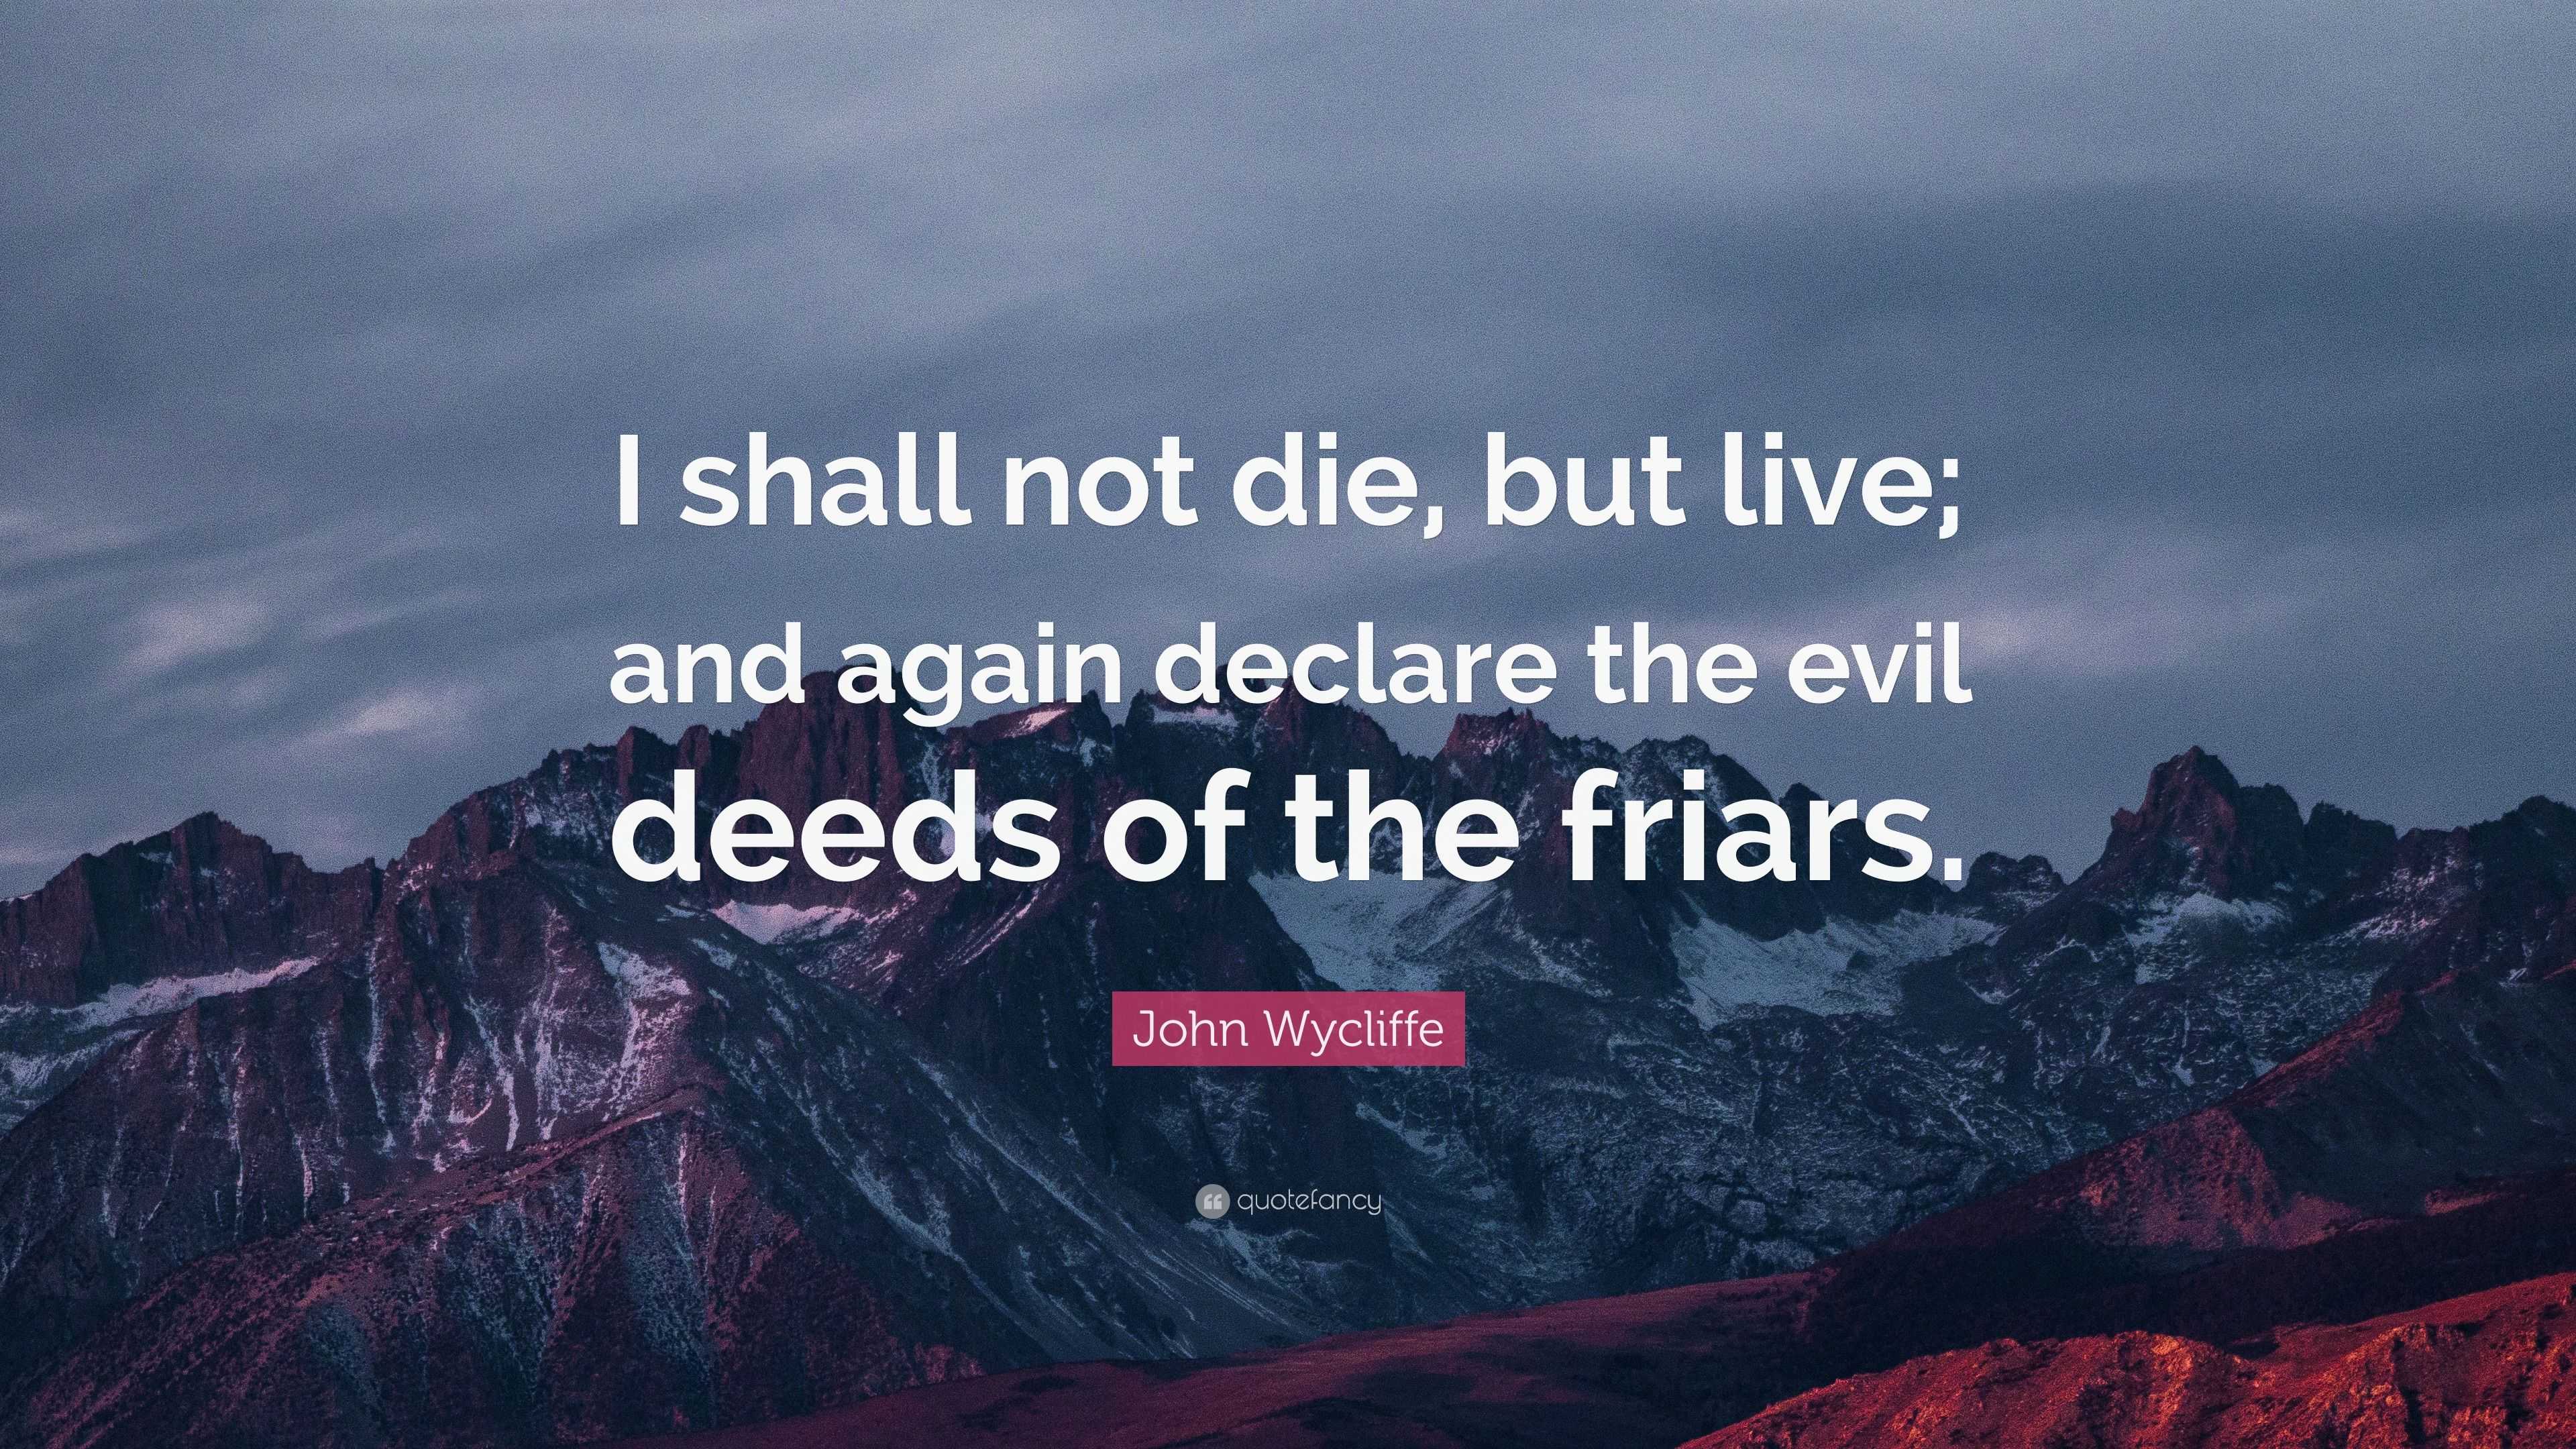 John Wycliffe Quote “I shall not die, but live; and again declare the